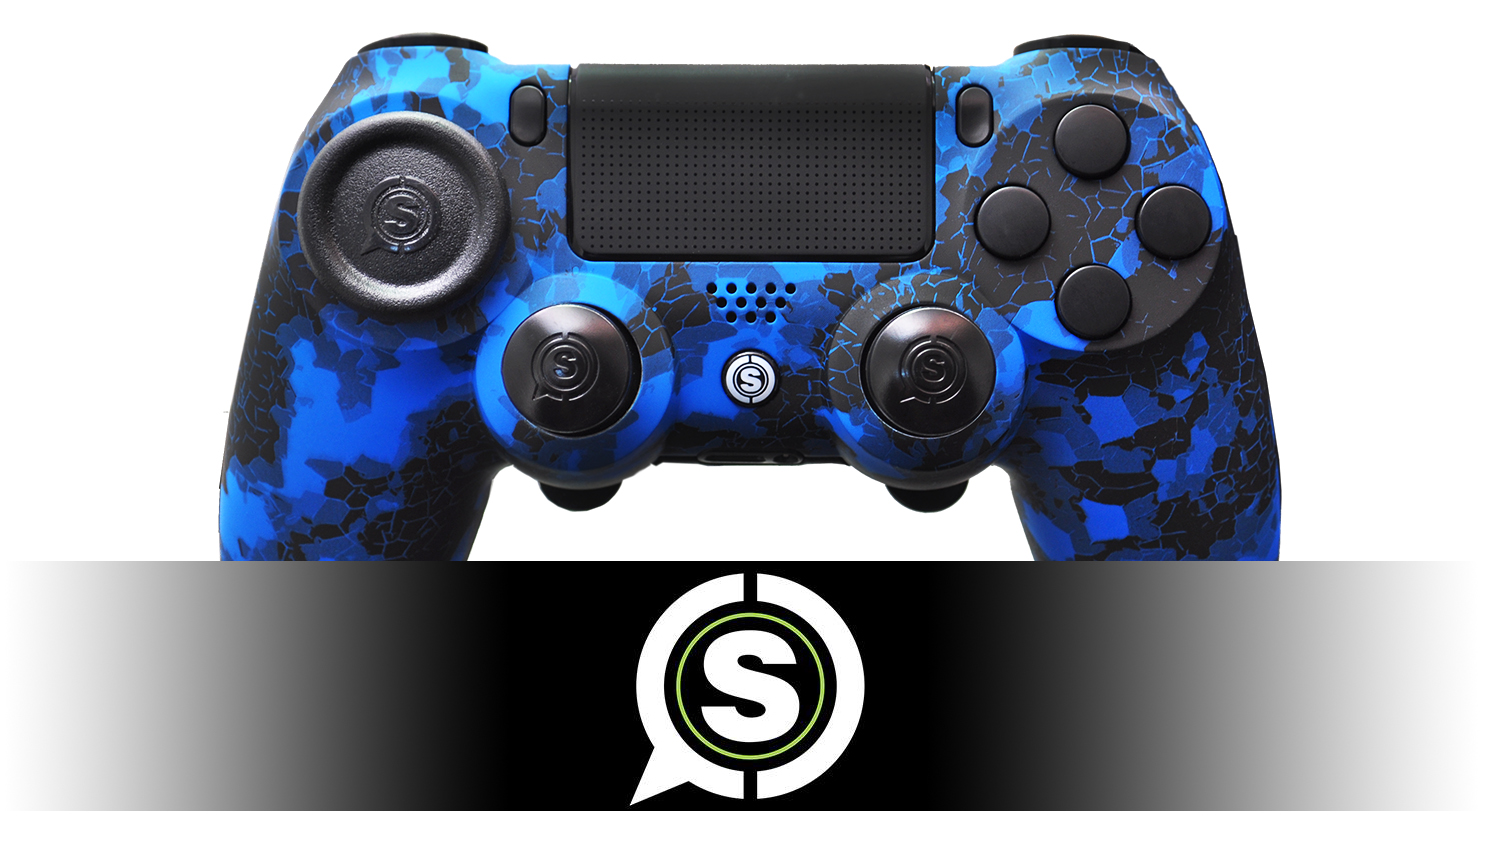 kobling brug Sodavand Review - Scuf Gaming 4PS Playstation 4 Controller — GameTyrant